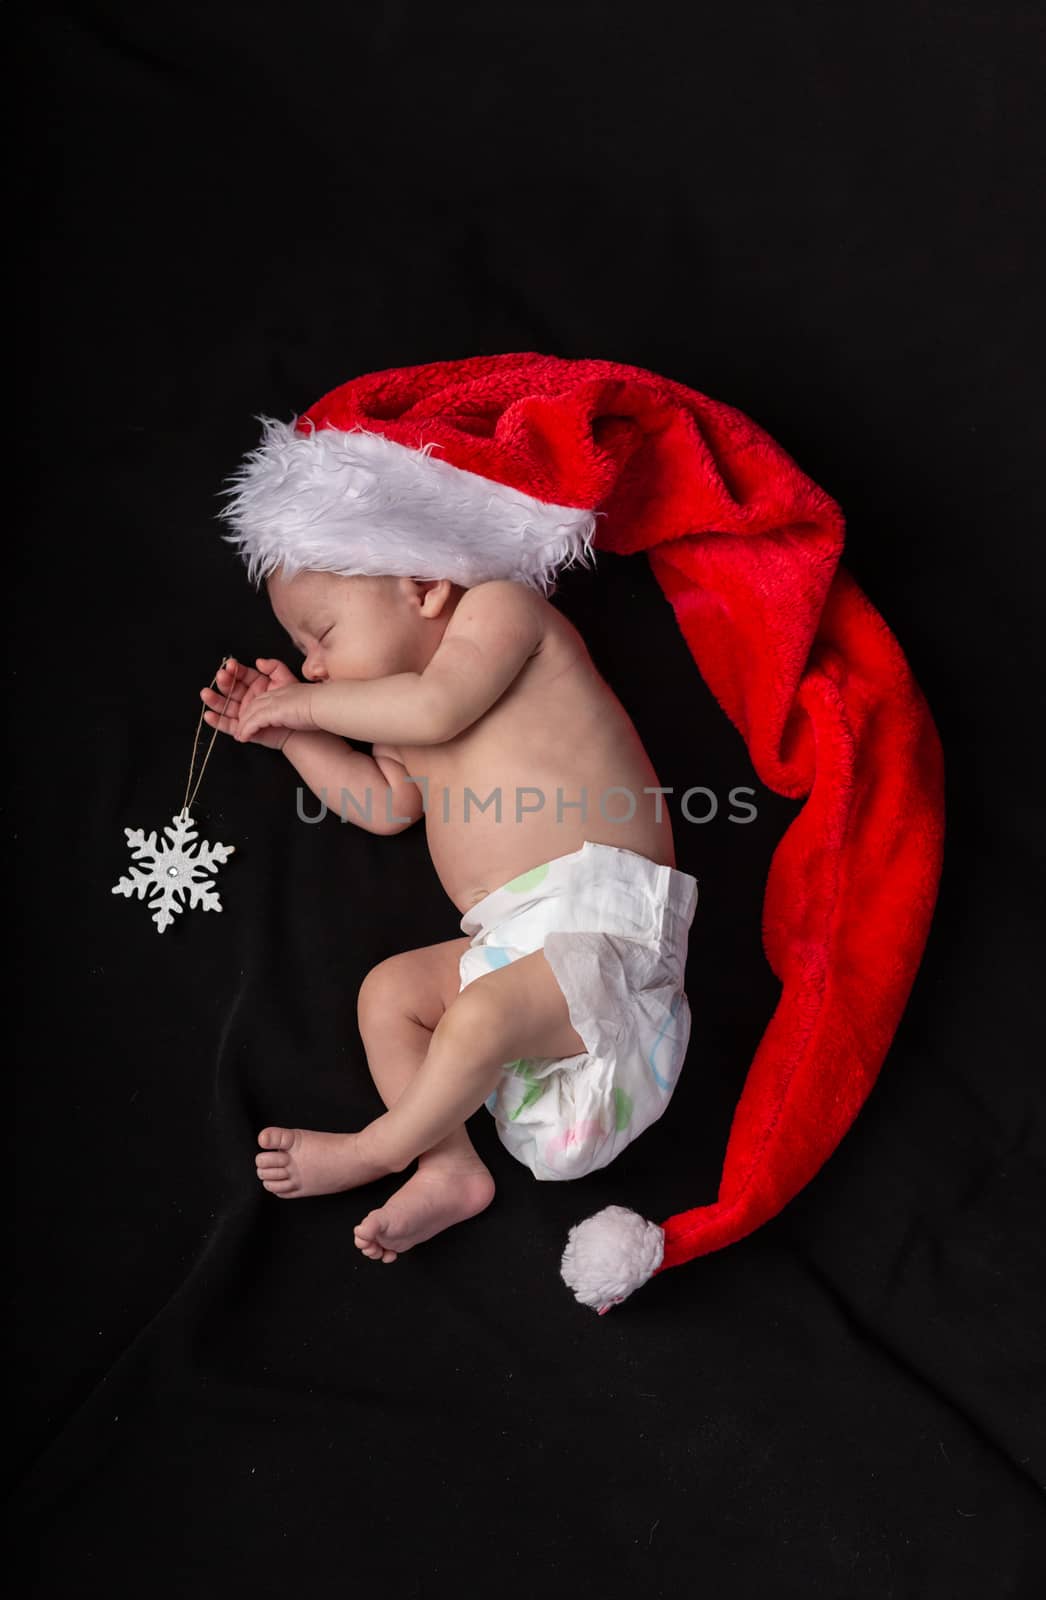 Little baby on a dark background in a long santa claus hat that lies in the shape of a crescent.